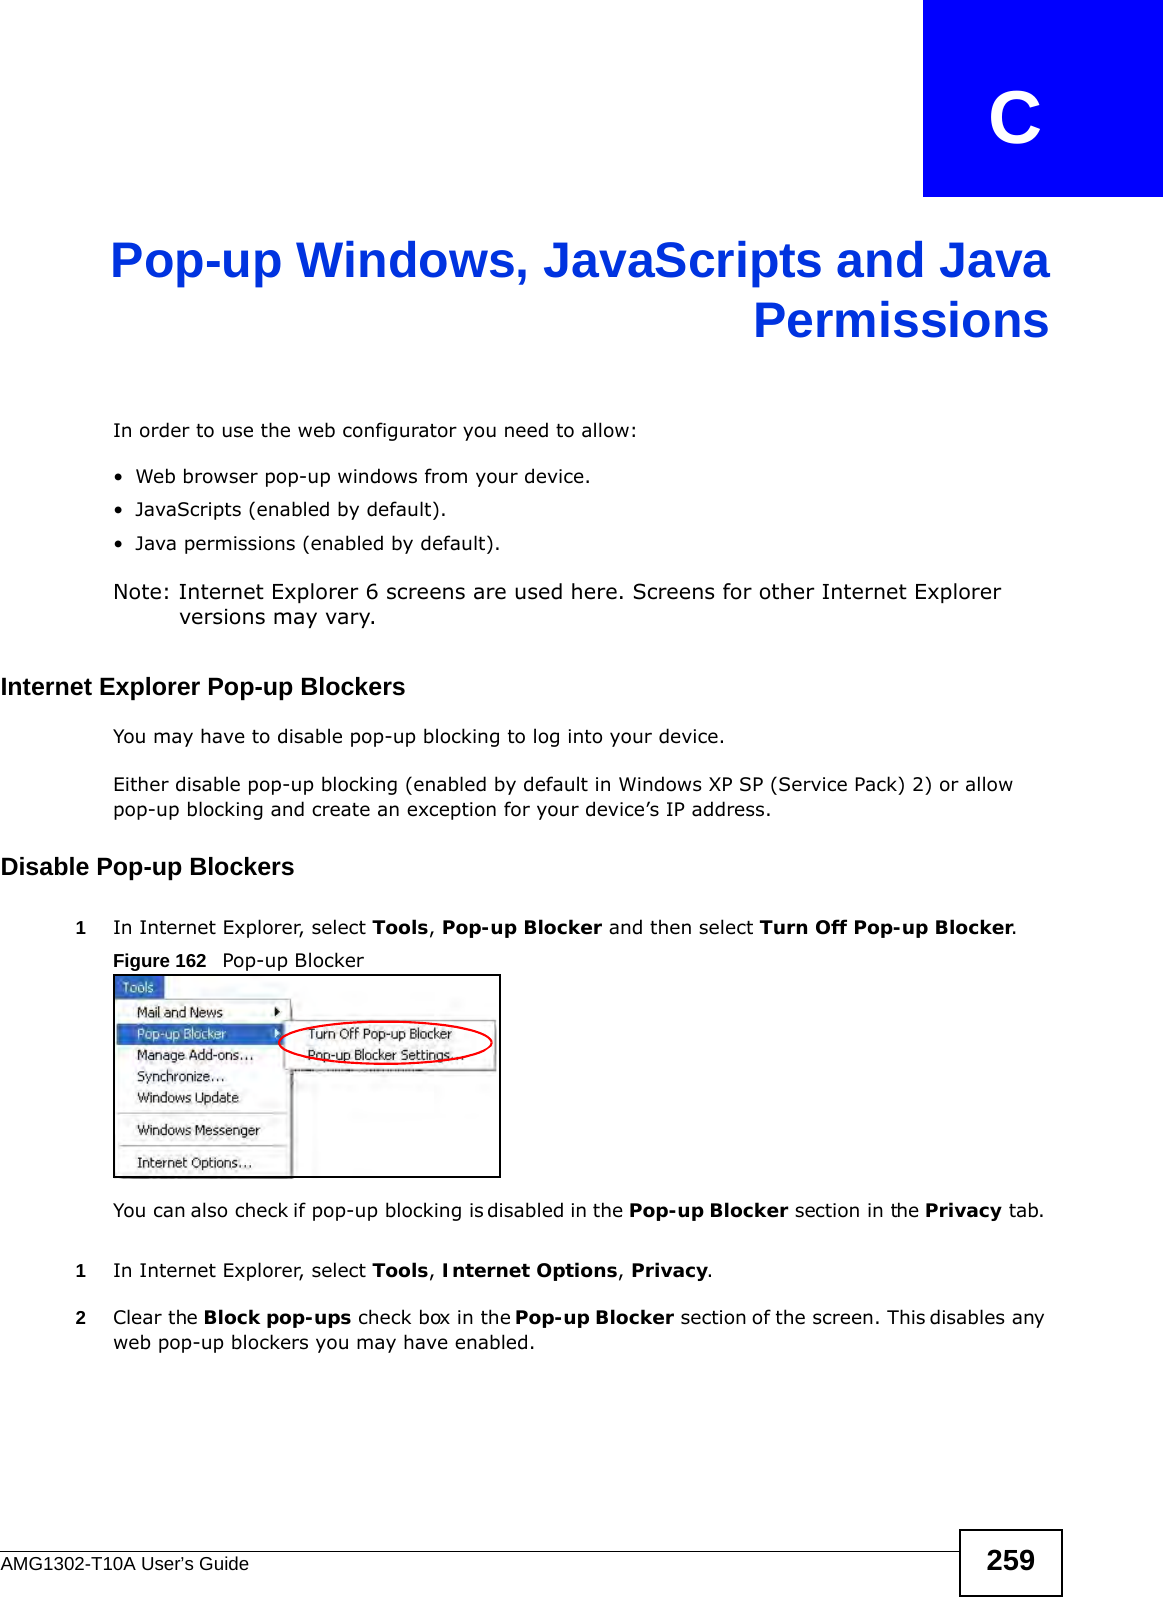 AMG1302-T10A User’s Guide 259APPENDIX   CPop-up Windows, JavaScripts and JavaPermissionsIn order to use the web configurator you need to allow:• Web browser pop-up windows from your device.• JavaScripts (enabled by default).• Java permissions (enabled by default).Note: Internet Explorer 6 screens are used here. Screens for other Internet Explorer versions may vary.Internet Explorer Pop-up BlockersYou may have to disable pop-up blocking to log into your device. Either disable pop-up blocking (enabled by default in Windows XP SP (Service Pack) 2) or allow pop-up blocking and create an exception for your device’s IP address.Disable Pop-up Blockers1In Internet Explorer, select Tools, Pop-up Blocker and then select Turn Off Pop-up Blocker. Figure 162   Pop-up BlockerYou can also check if pop-up blocking is disabled in the Pop-up Blocker section in the Privacy tab. 1In Internet Explorer, select Tools, Internet Options, Privacy.2Clear the Block pop-ups check box in the Pop-up Blocker section of the screen. This disables any web pop-up blockers you may have enabled. 